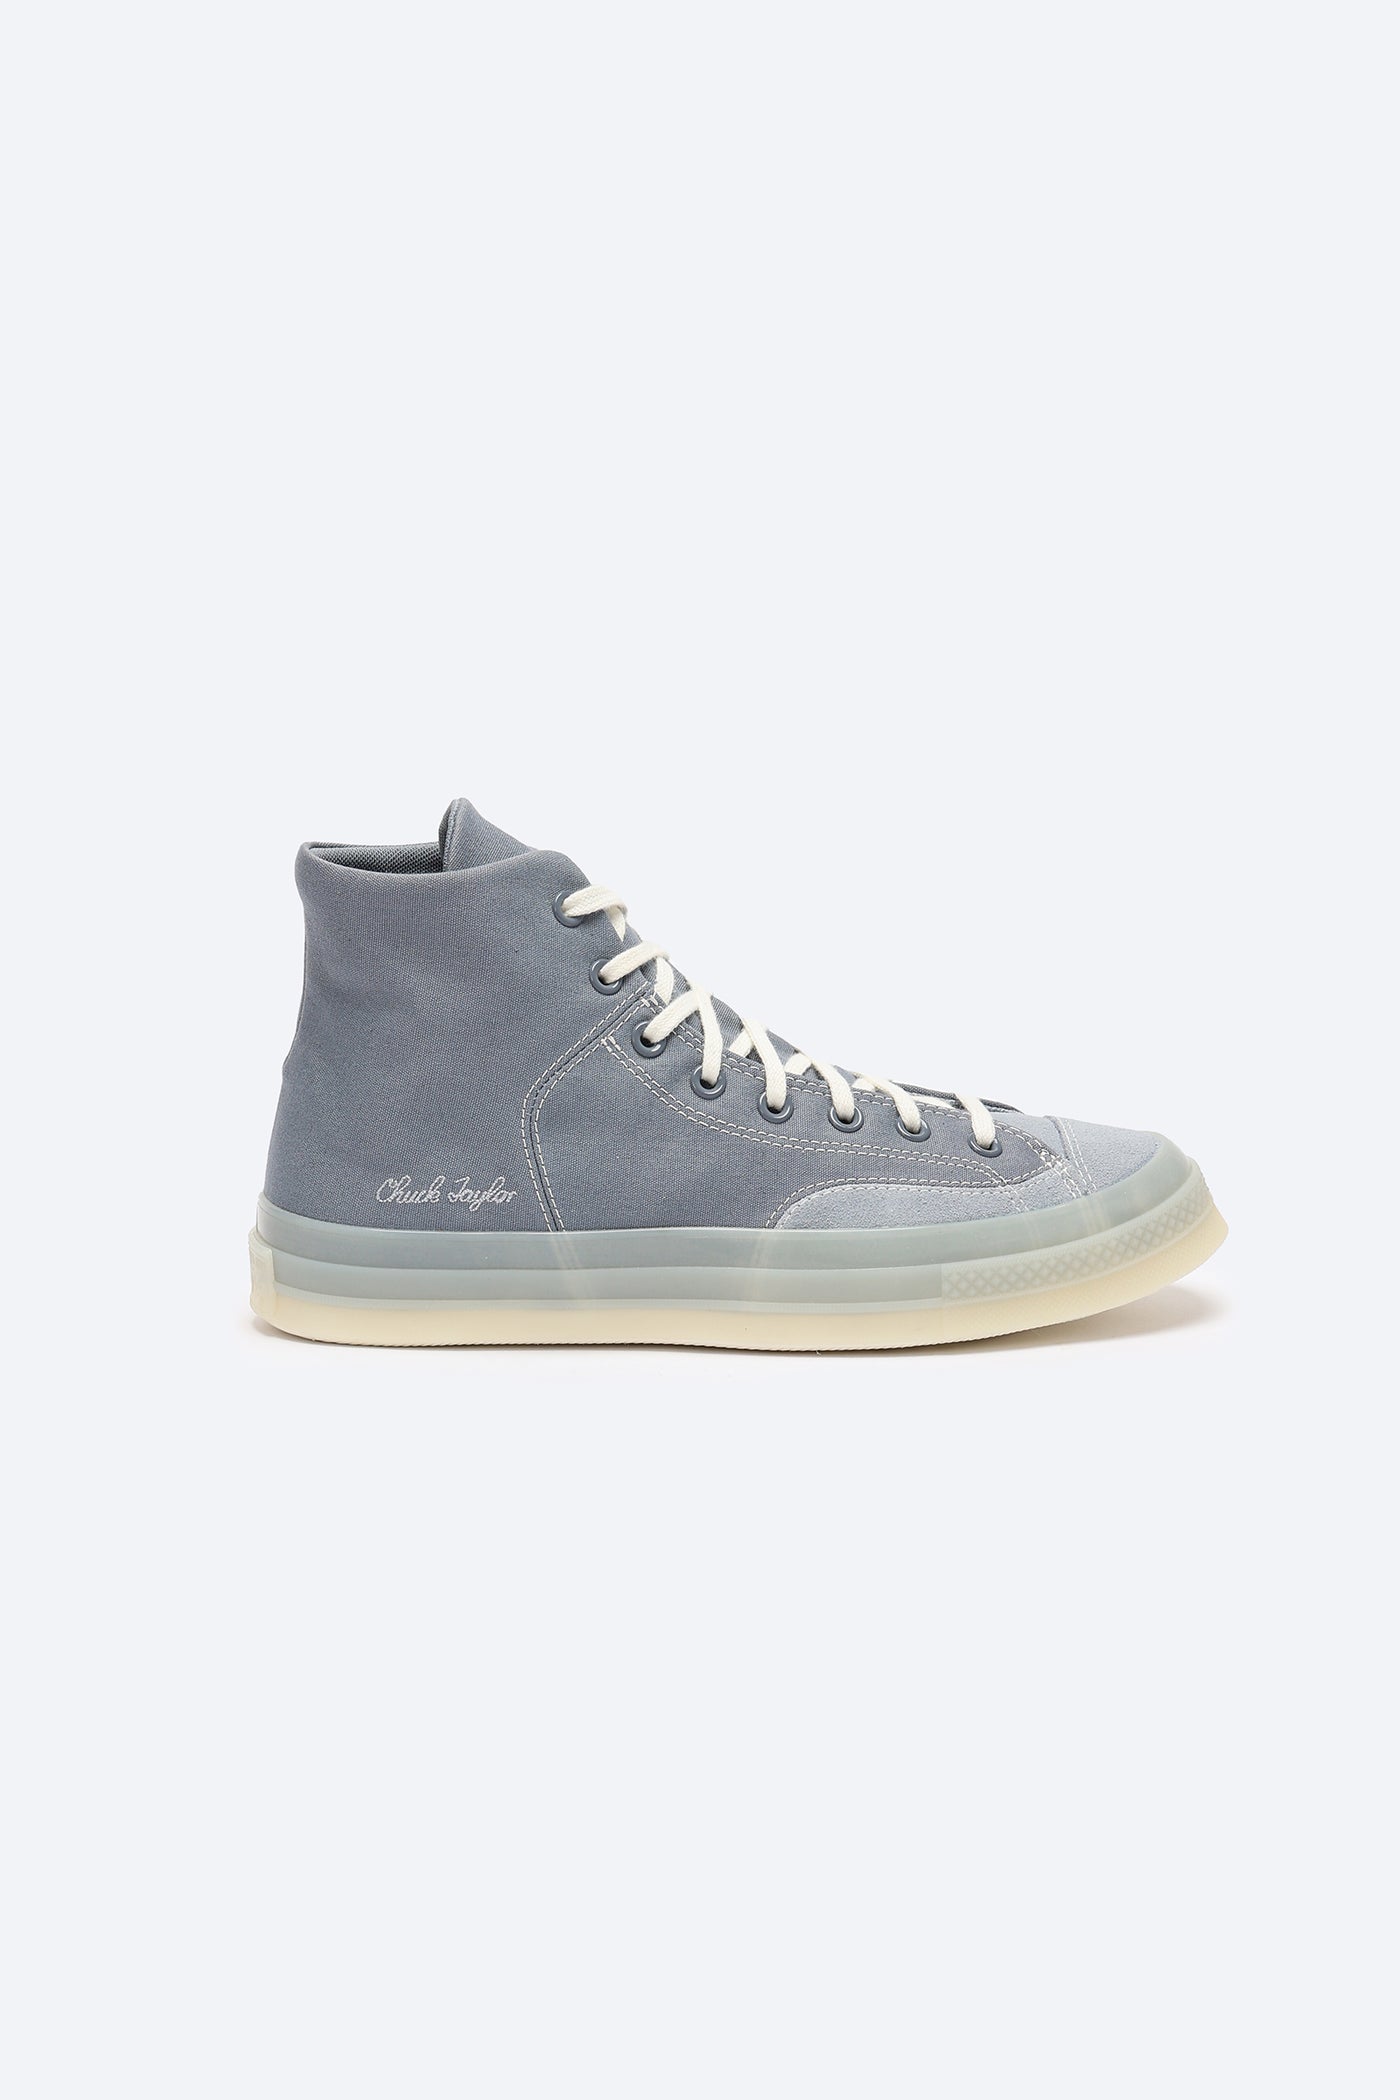 Sneakers - ChucK 70 Marquis  - Cruise High